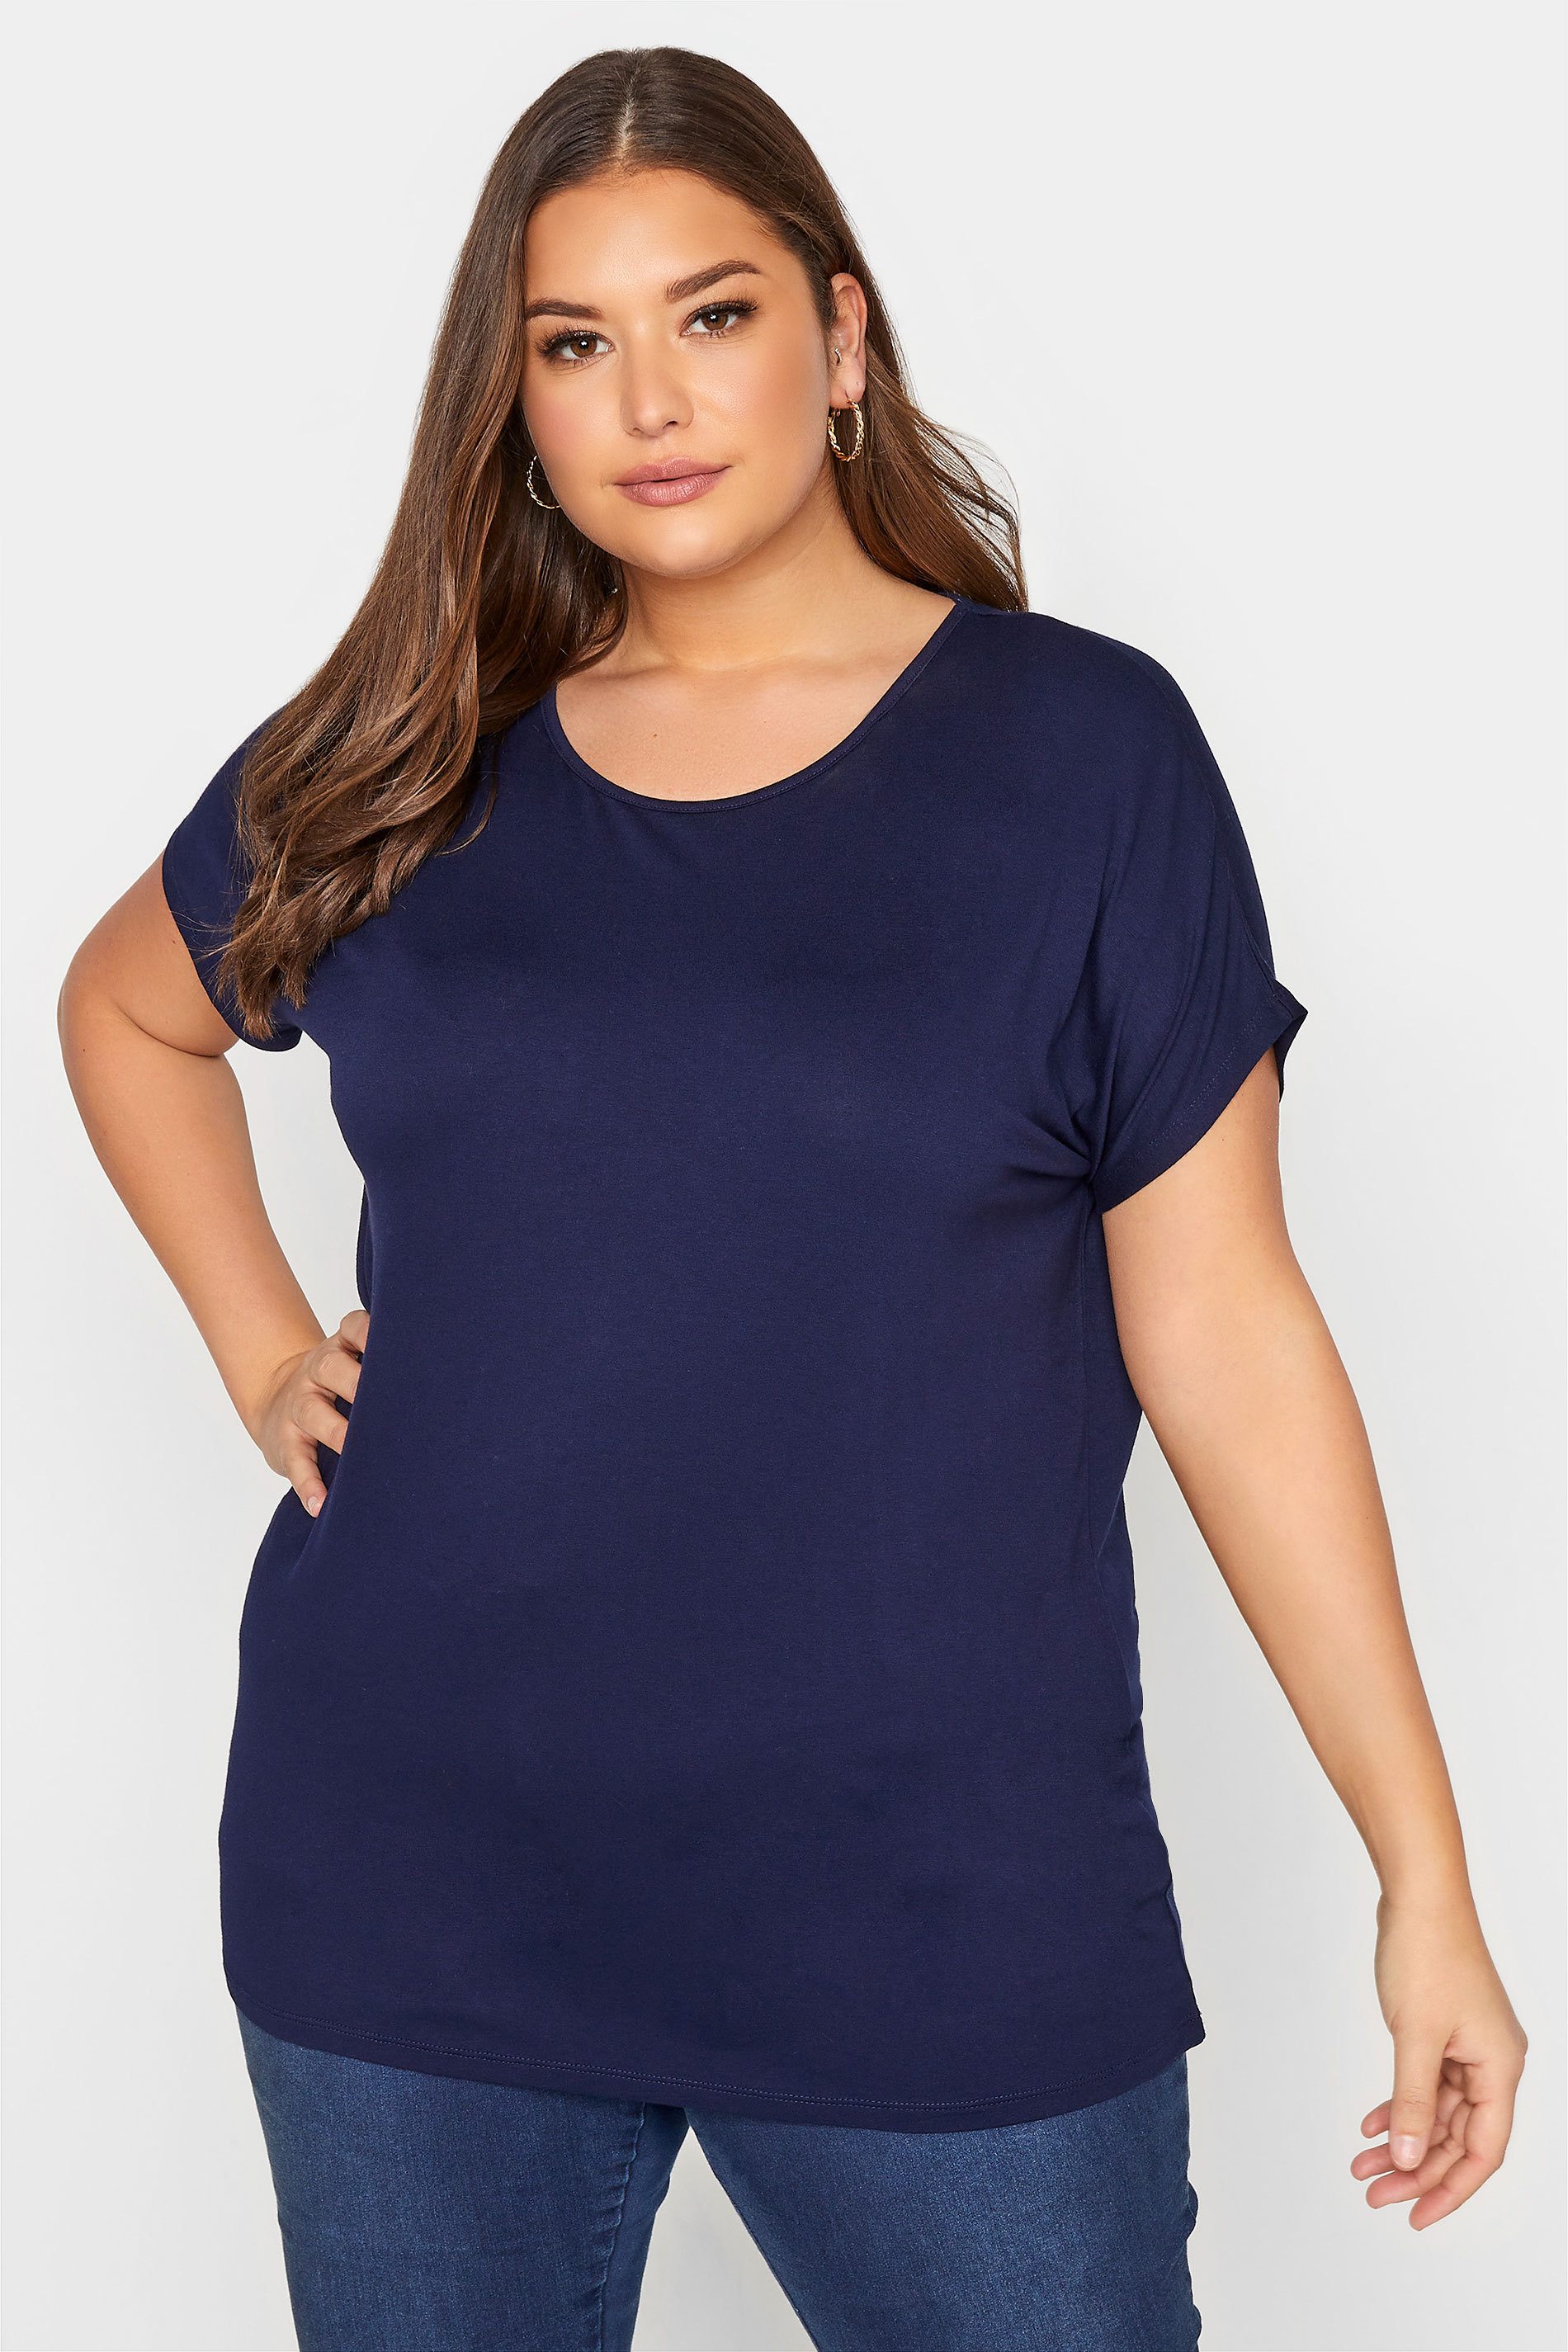 Grande taille  Tops Grande taille  T-Shirts | T-Shirt Bleu Marine Manches Courtes Jersey - TU07706